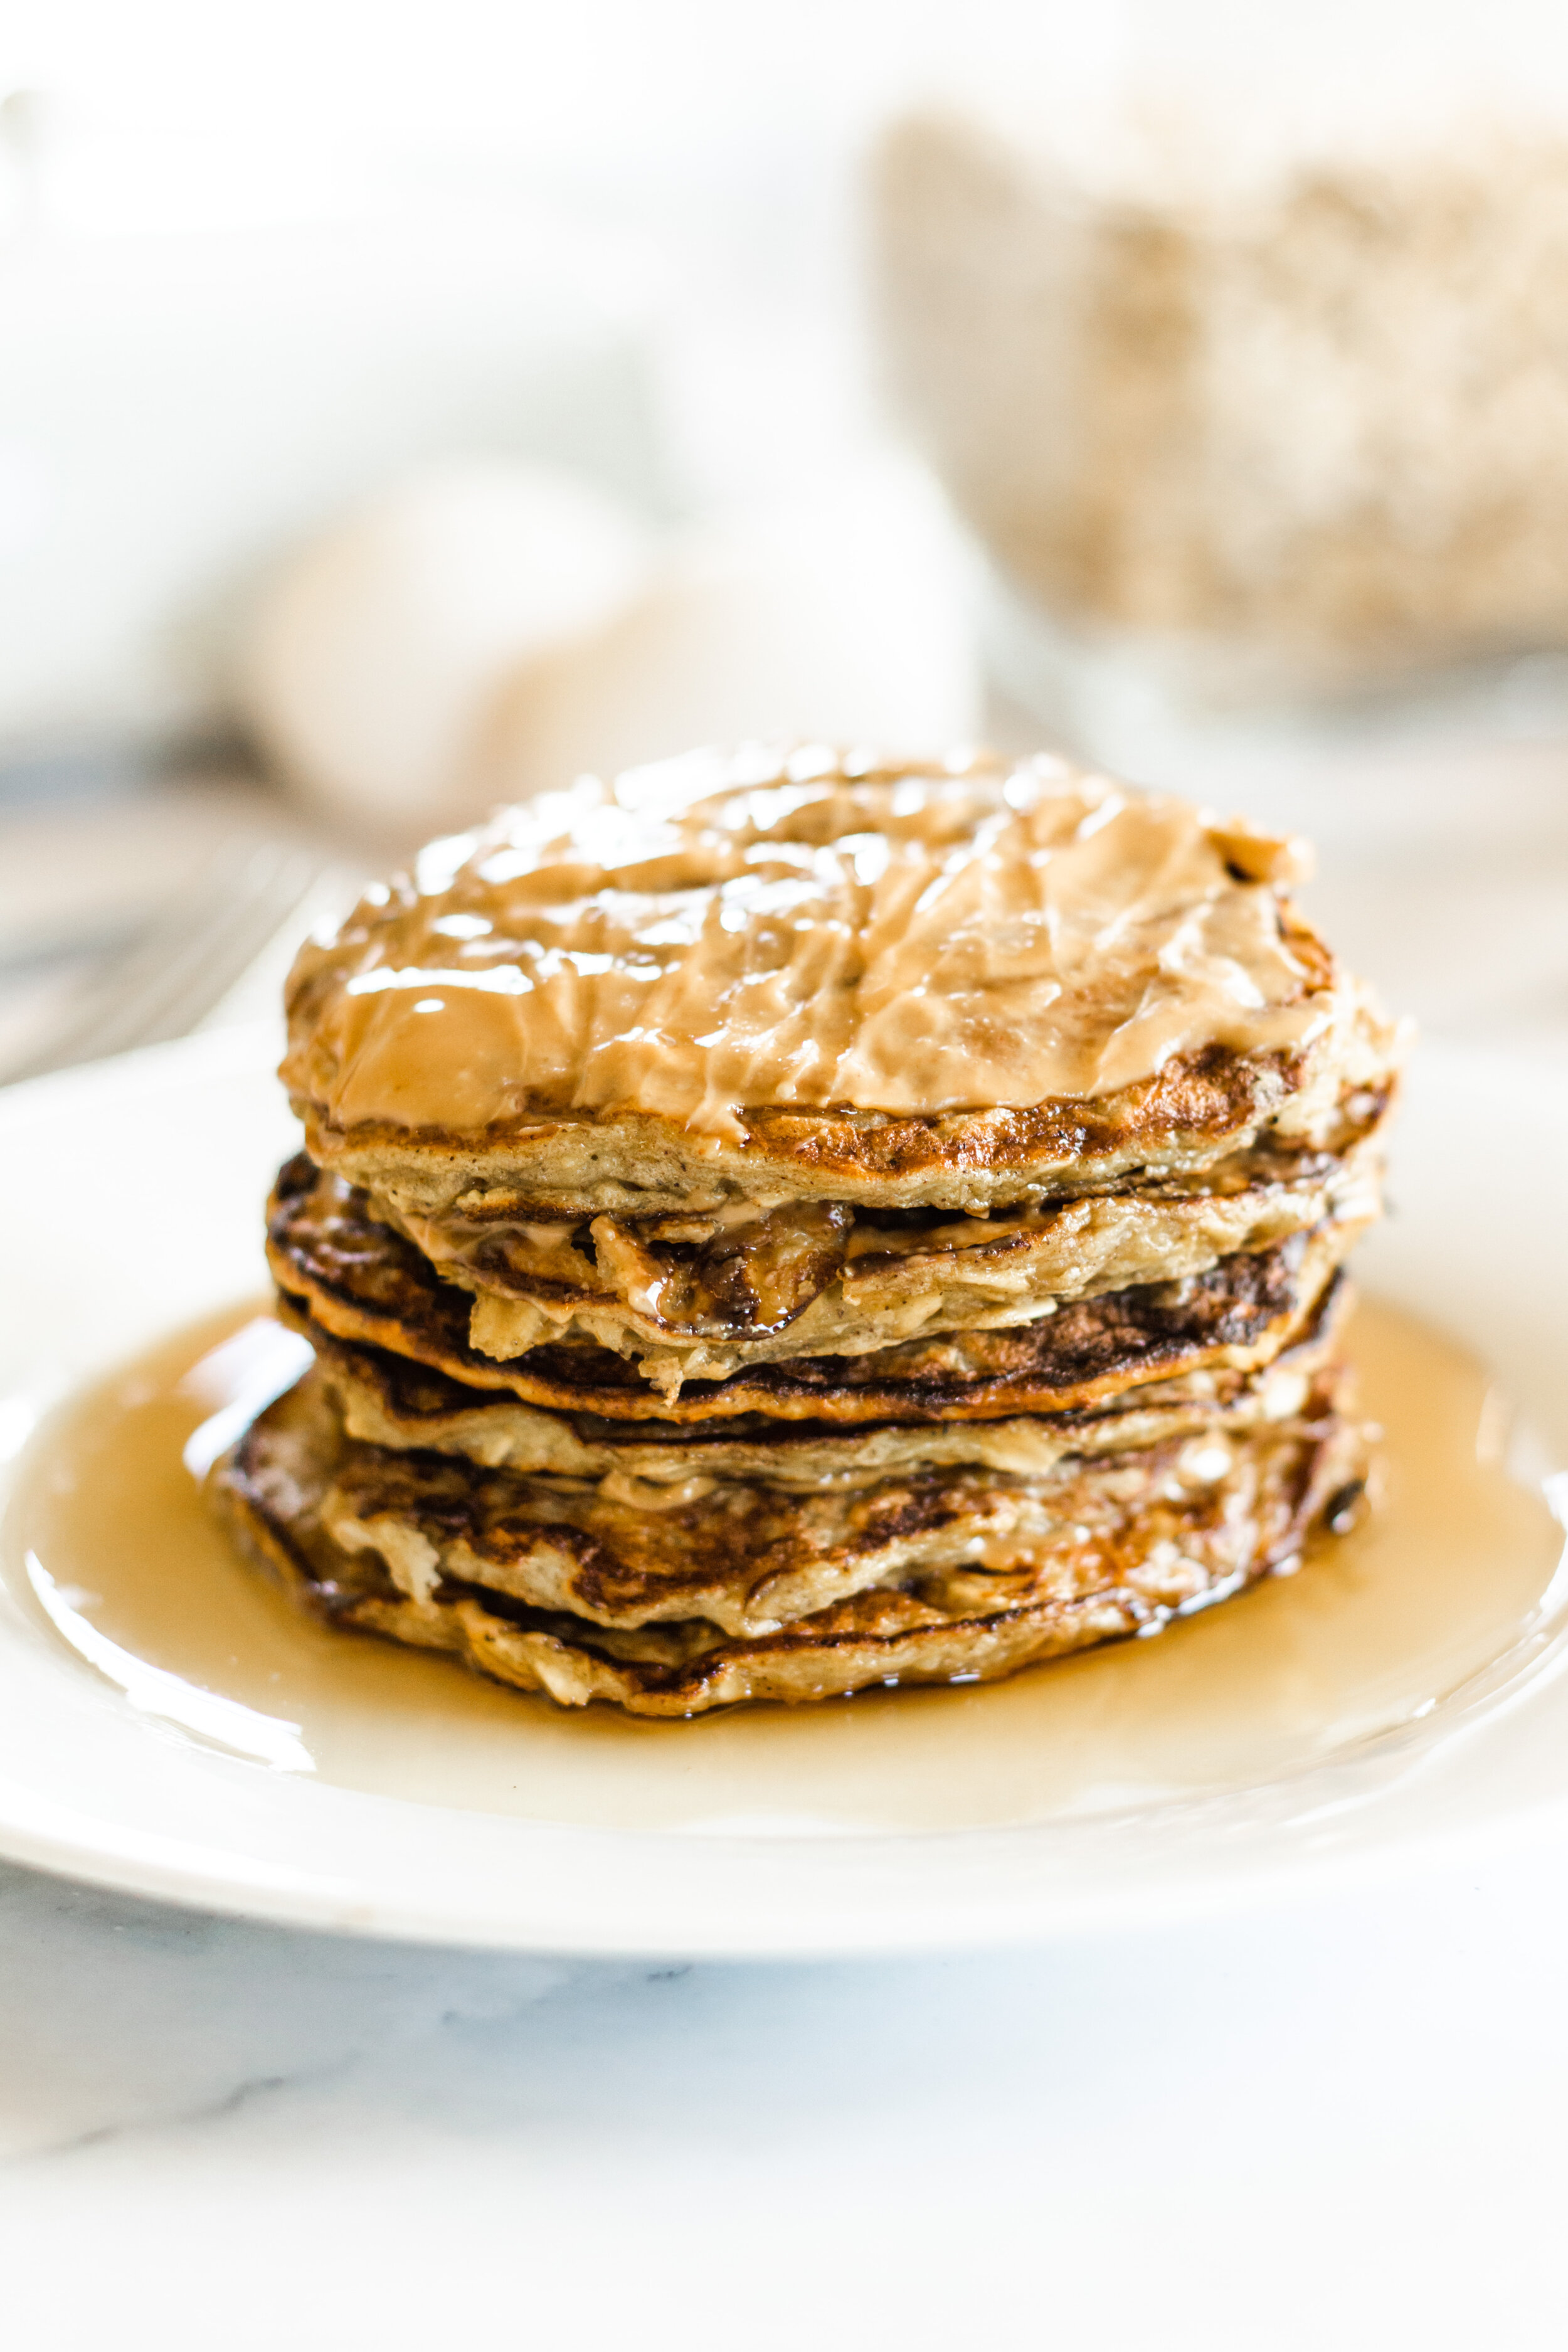 This recipe serves one and makes six small pancakes or three medium sized pancakes!